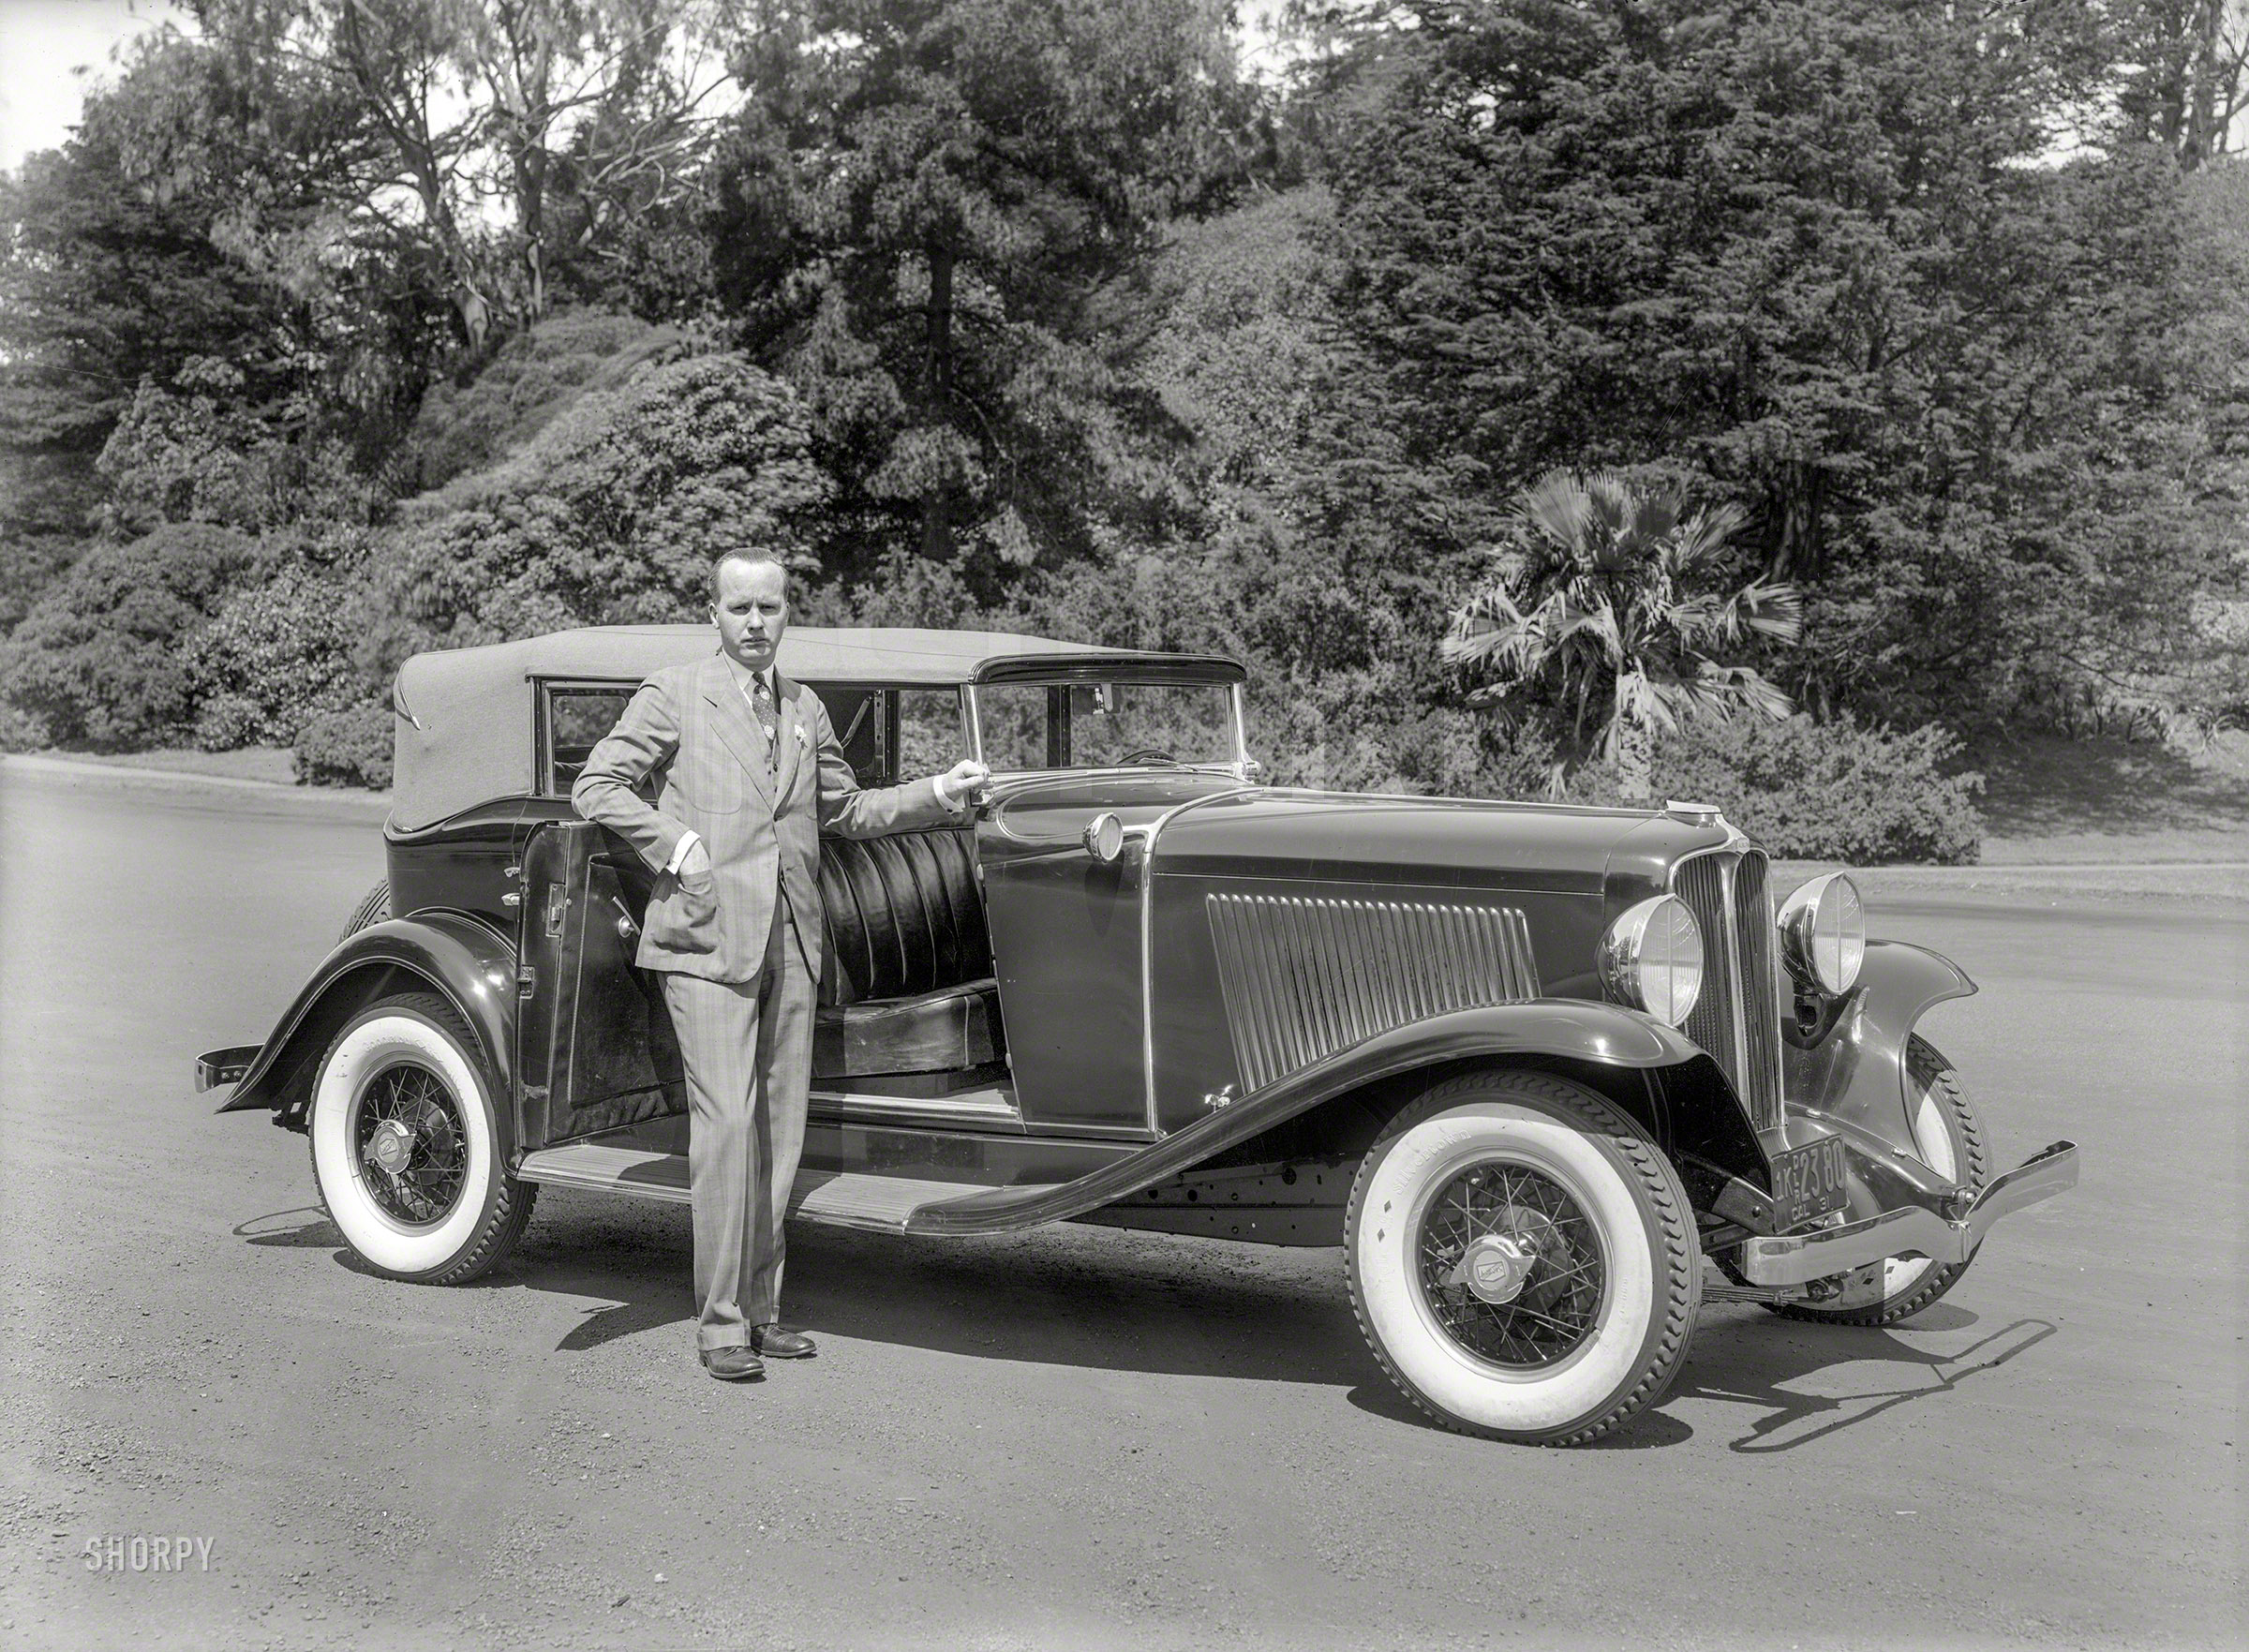 San Francisco, 1931. "Auburn at Golden Gate Park." Similar to the car seen earlier here. 5x7 inch glass negative by Christopher Helin. View full size.